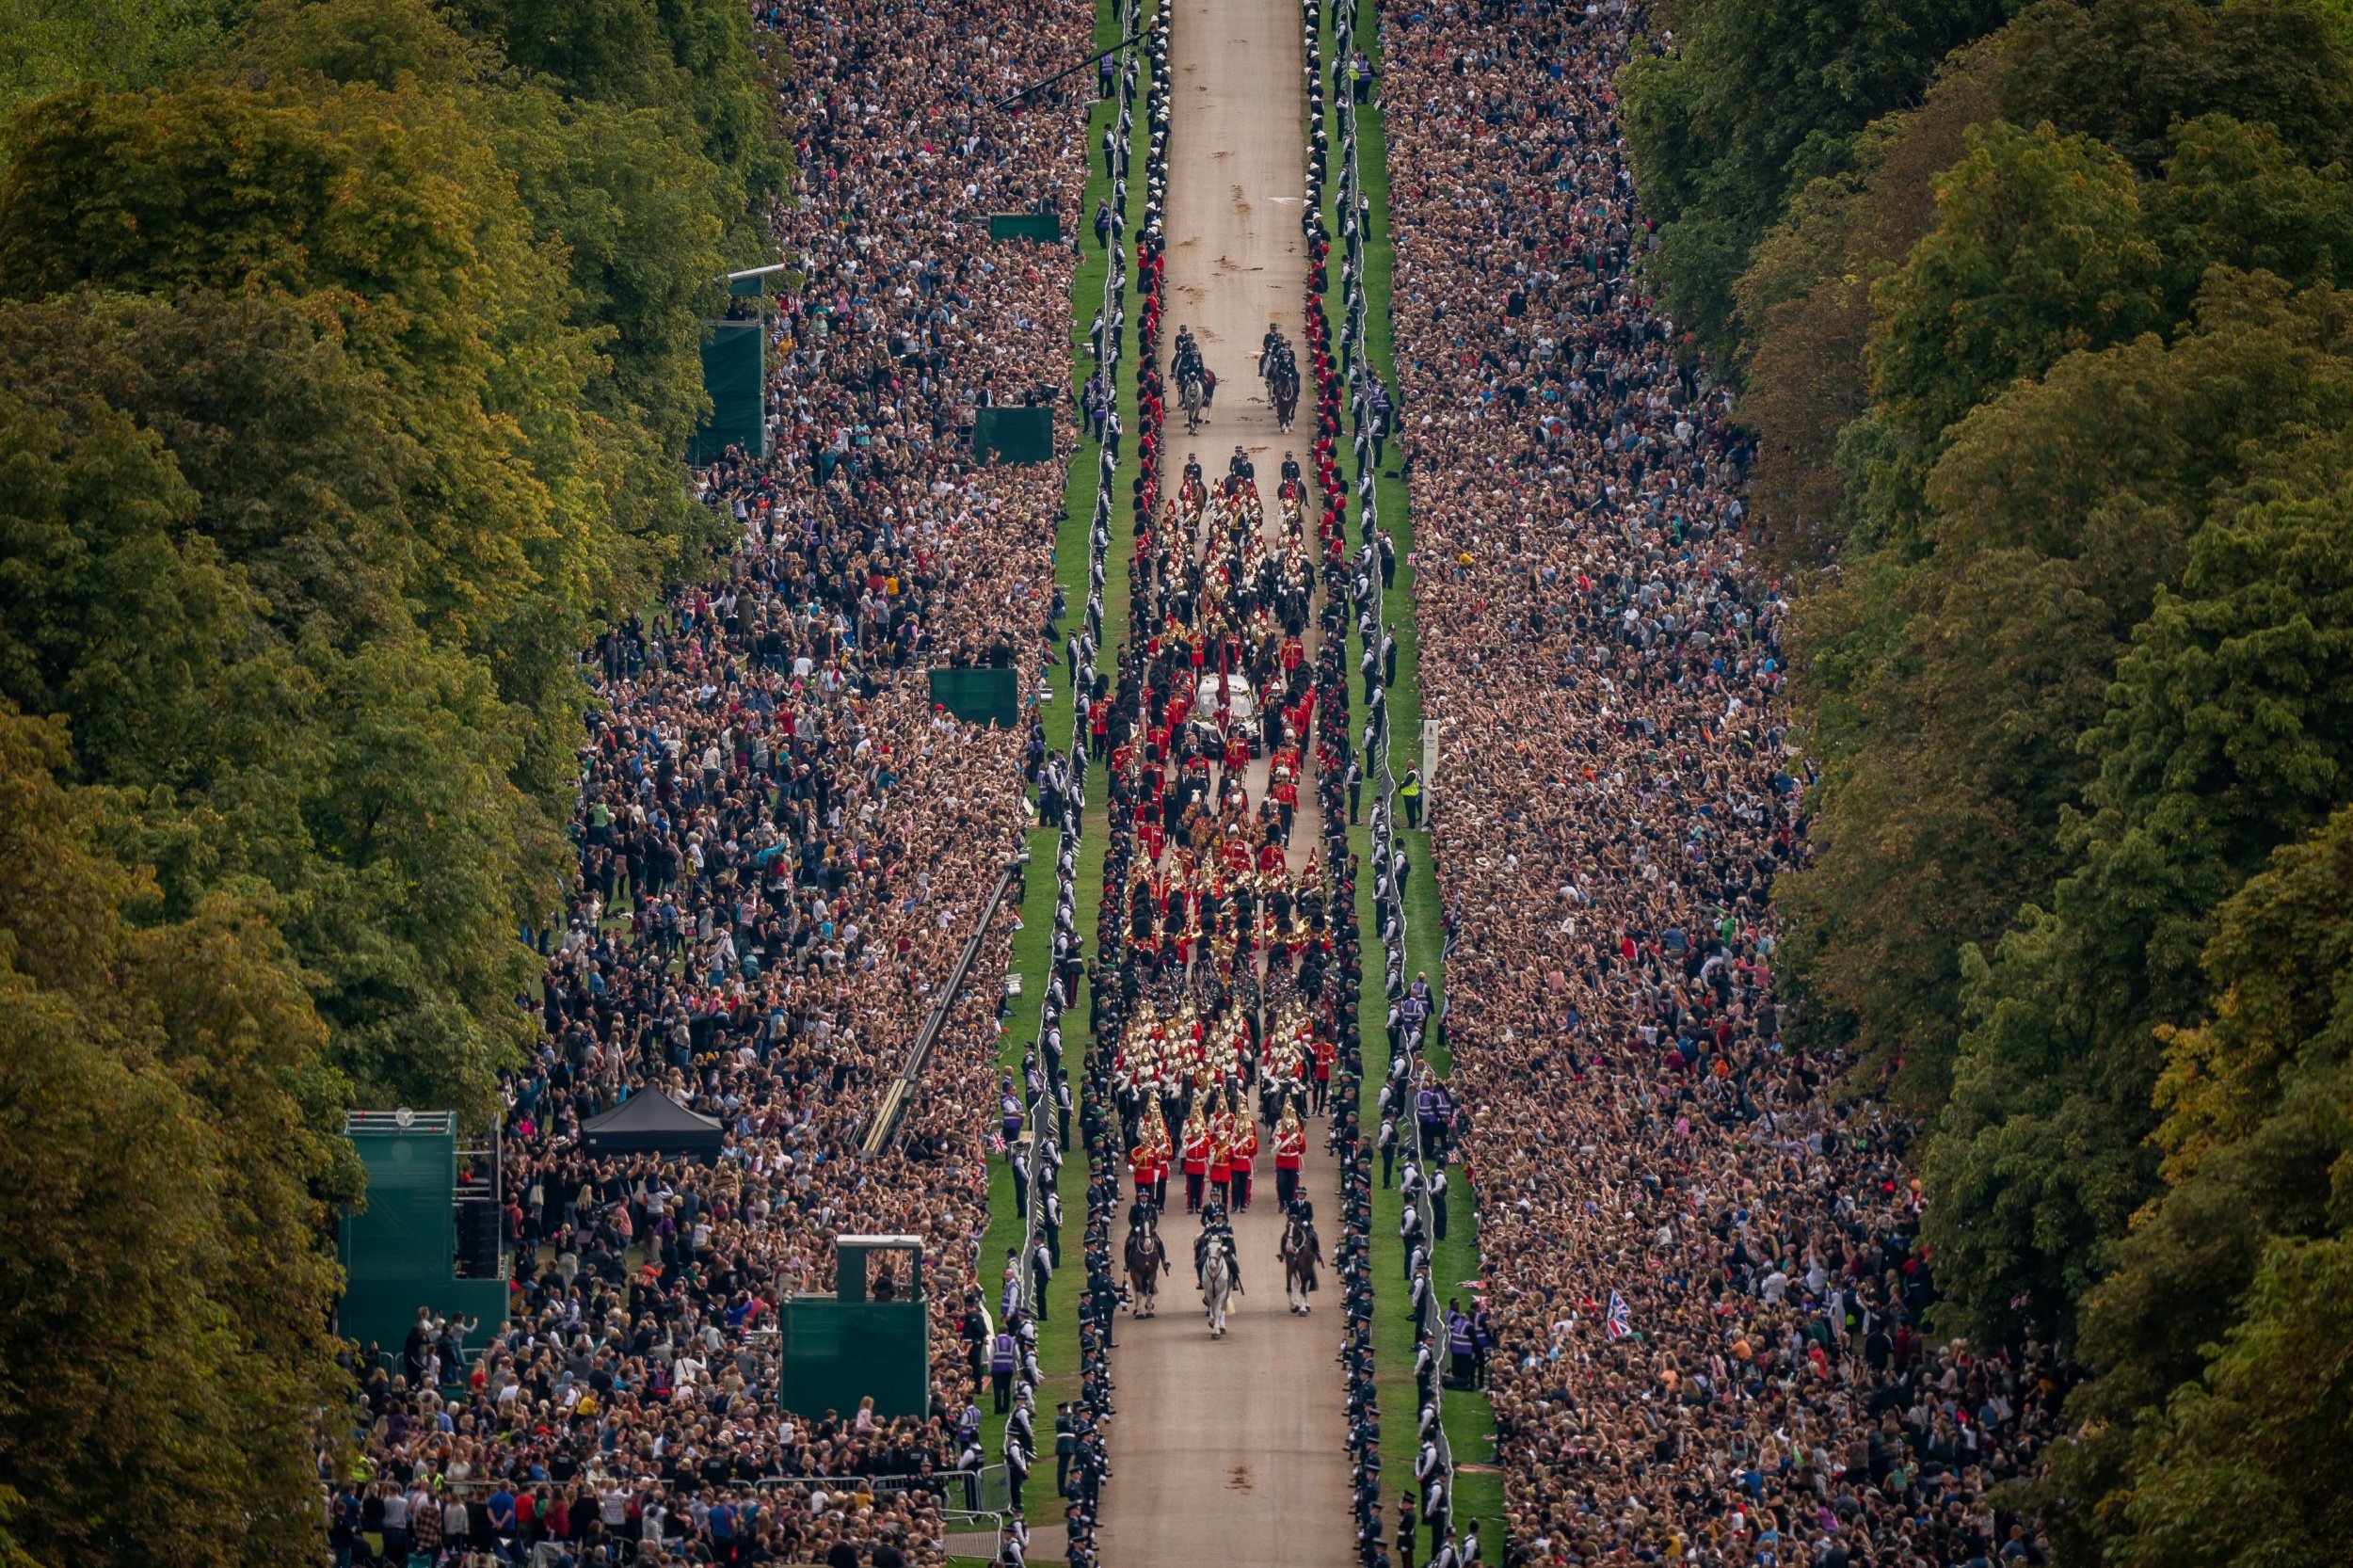  The Ceremonial Procession of the coffin of Queen Elizabeth II travels down the Long Walk and into the grounds of Windsor past Emma, the monarch's fell pony, before arriving at Windsor Castle for the Committal Service at St George's Chapel. 